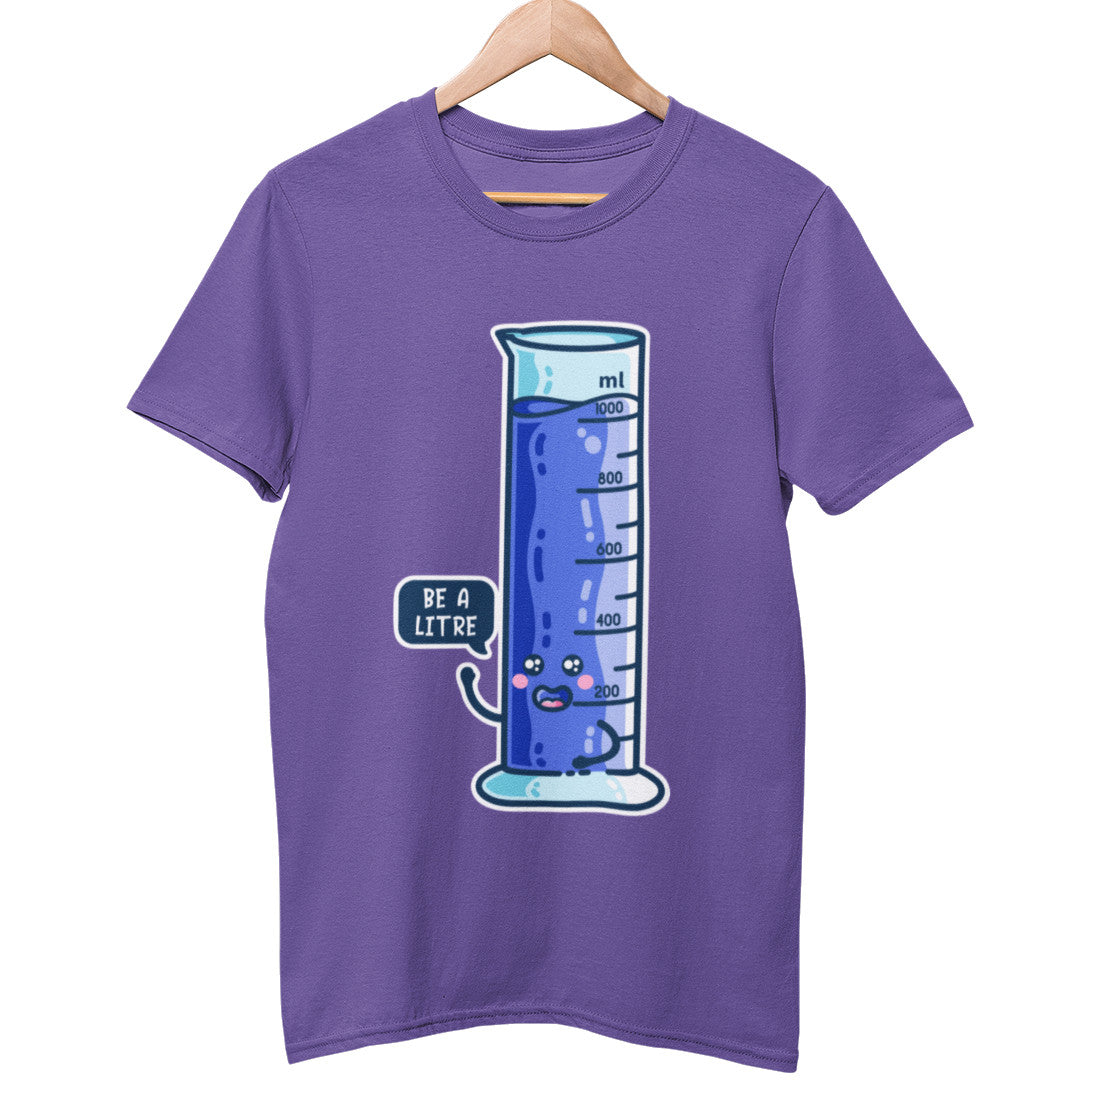 A purple unisex crewneck t-shirt on a wooden hanger with a design on its chest of a kawaii cute thousand millilitre graduated cylinder filled with blue liquid and a speech bubble to the left saying be a litre